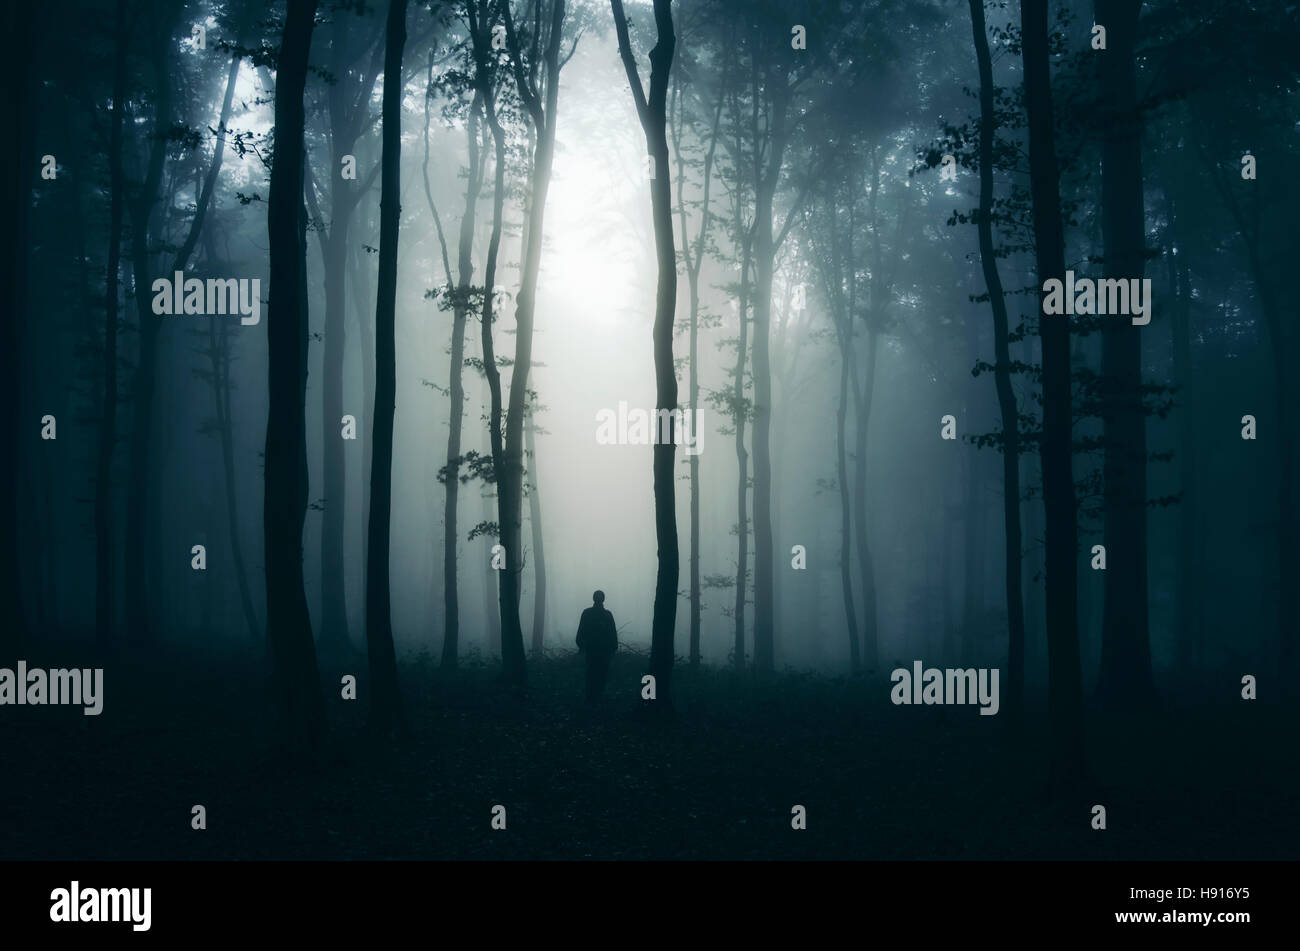 Night in forest mysterious landscape. Trees in darkness in foggy woods with man silhouette Stock Photo